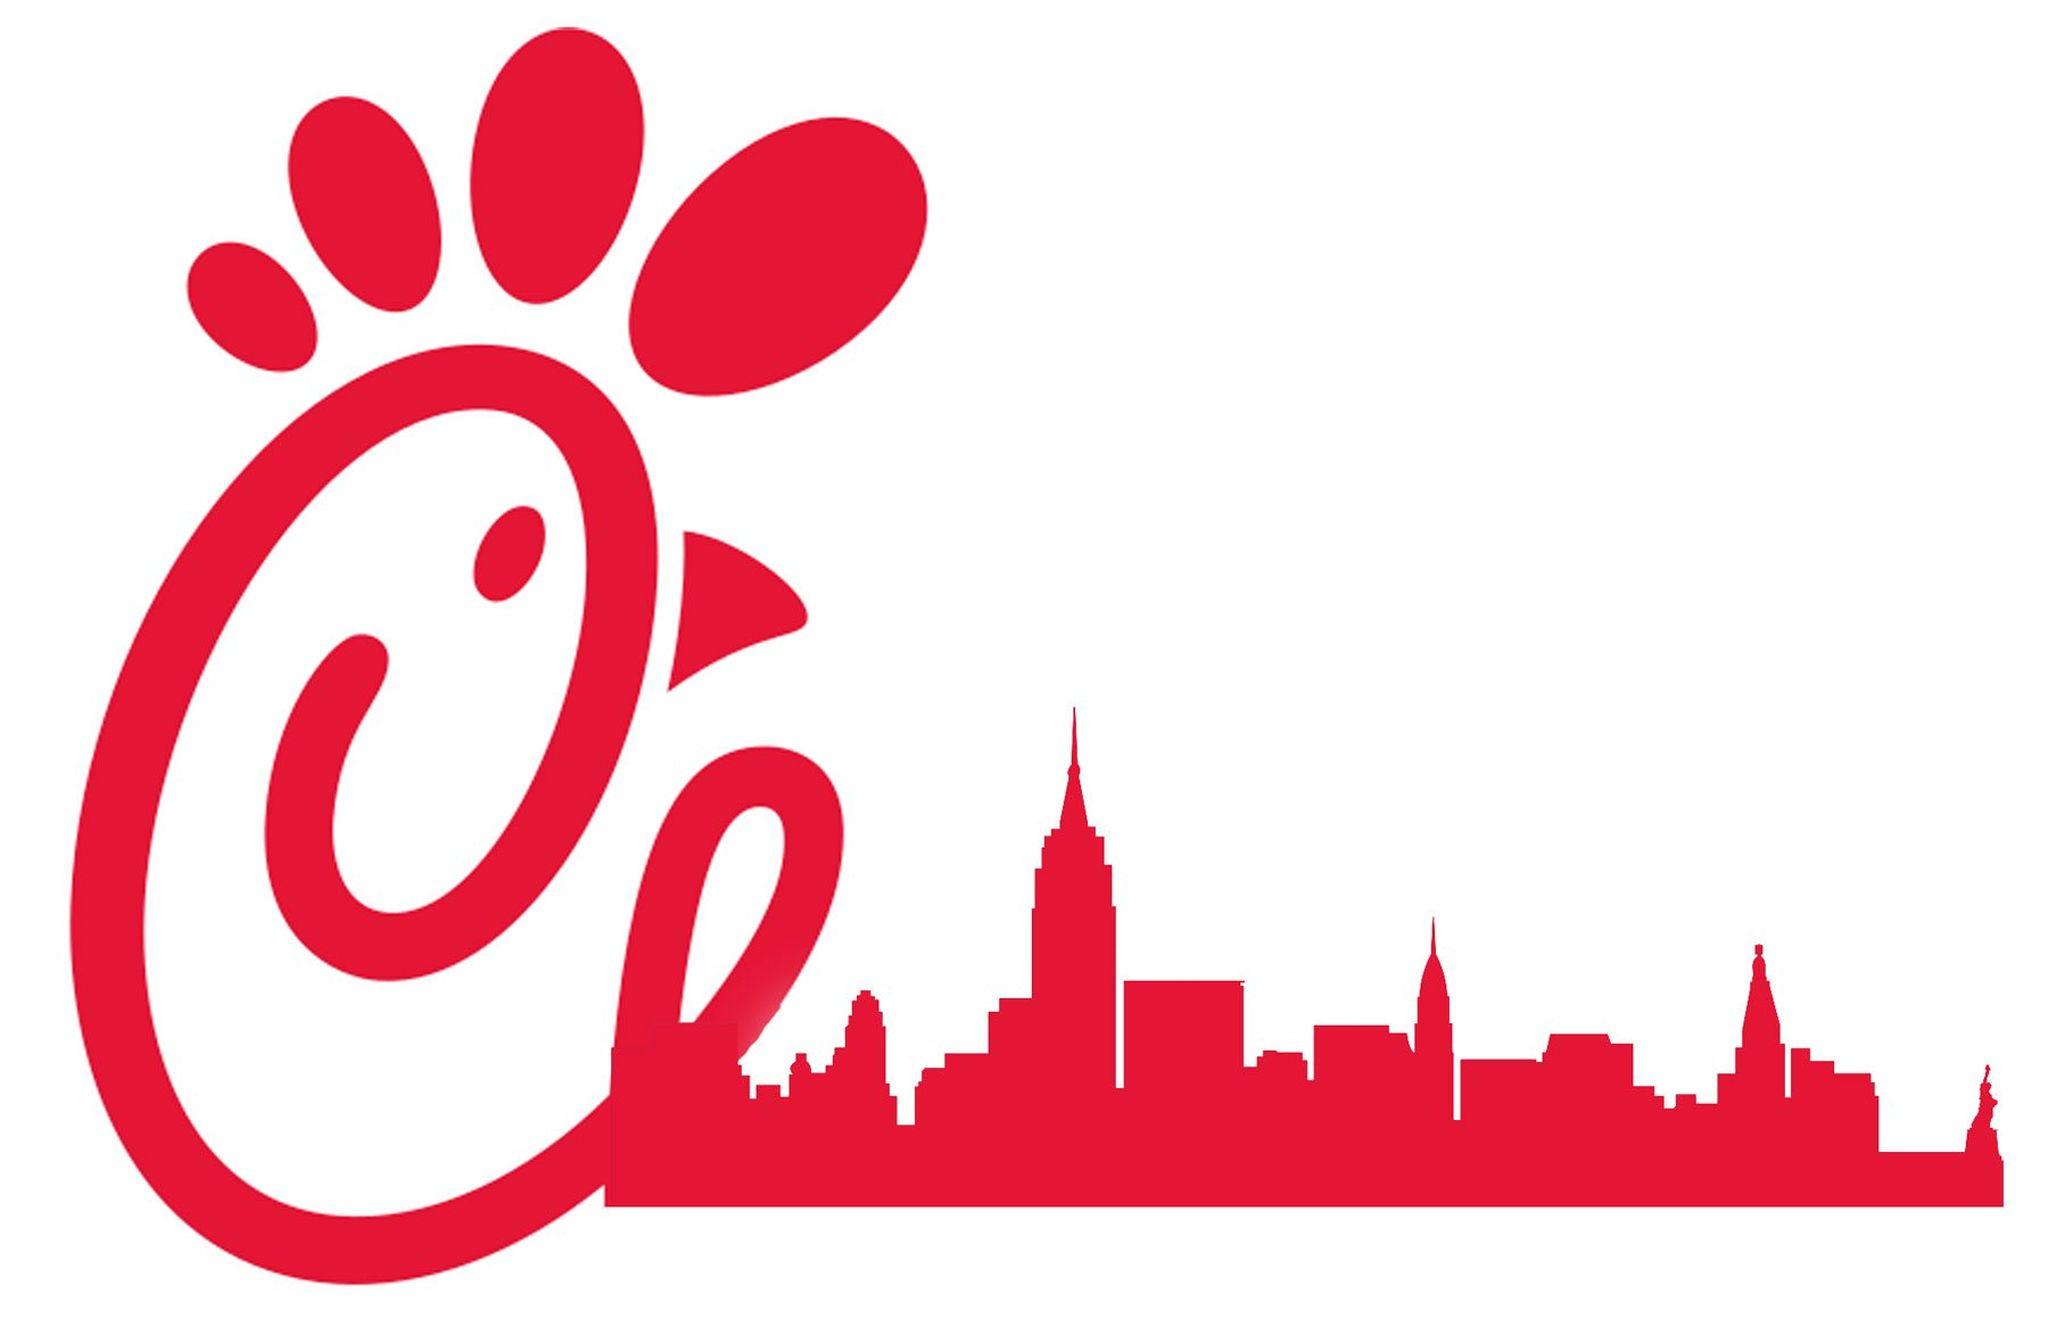 Chckfila Logo - Chick Fil A Infiltration Of View Of View